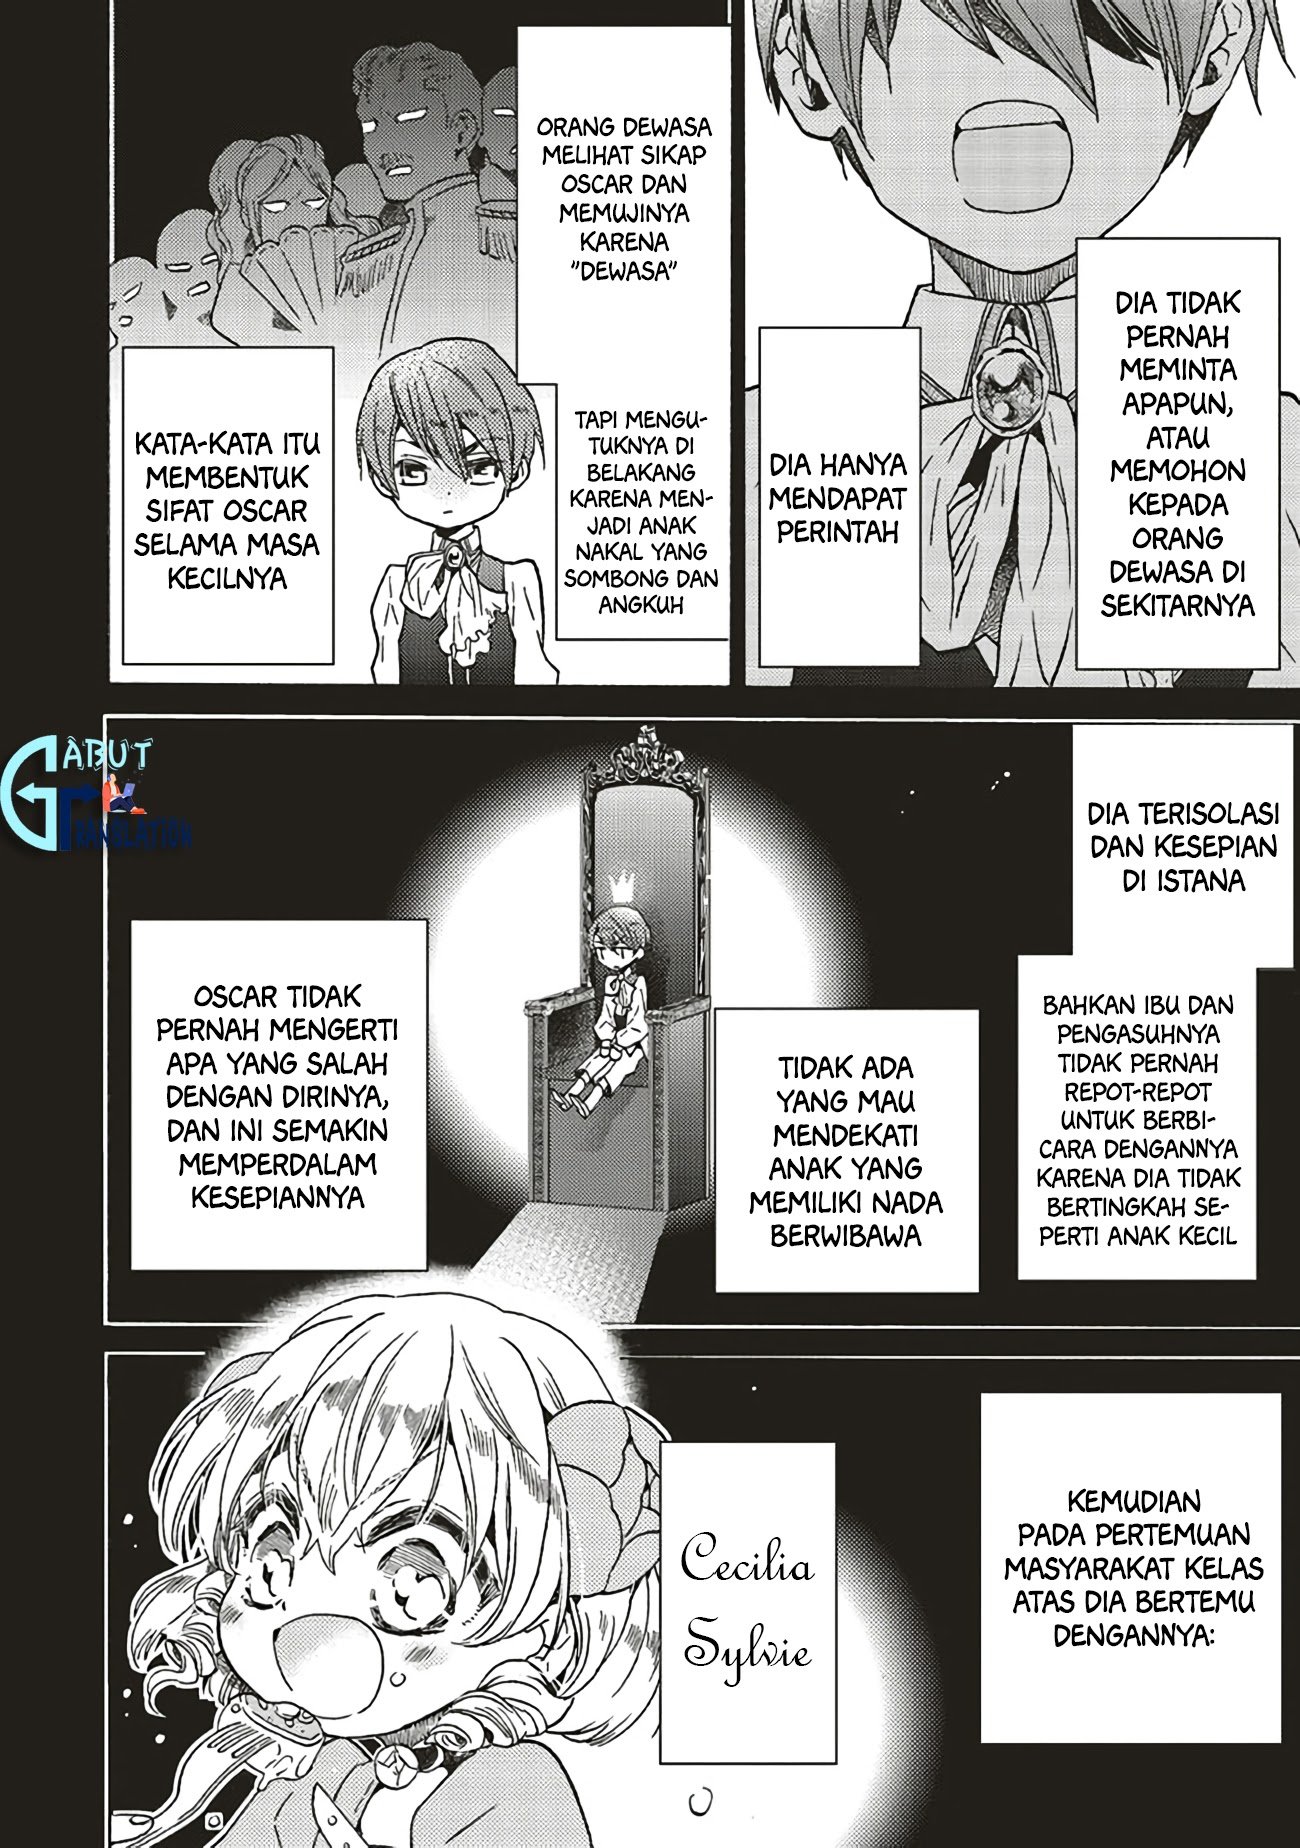 The Villainess, Cecilia Sylvie, Doesn’t Want to Die so She Decided to Crossdress Chapter 02.3